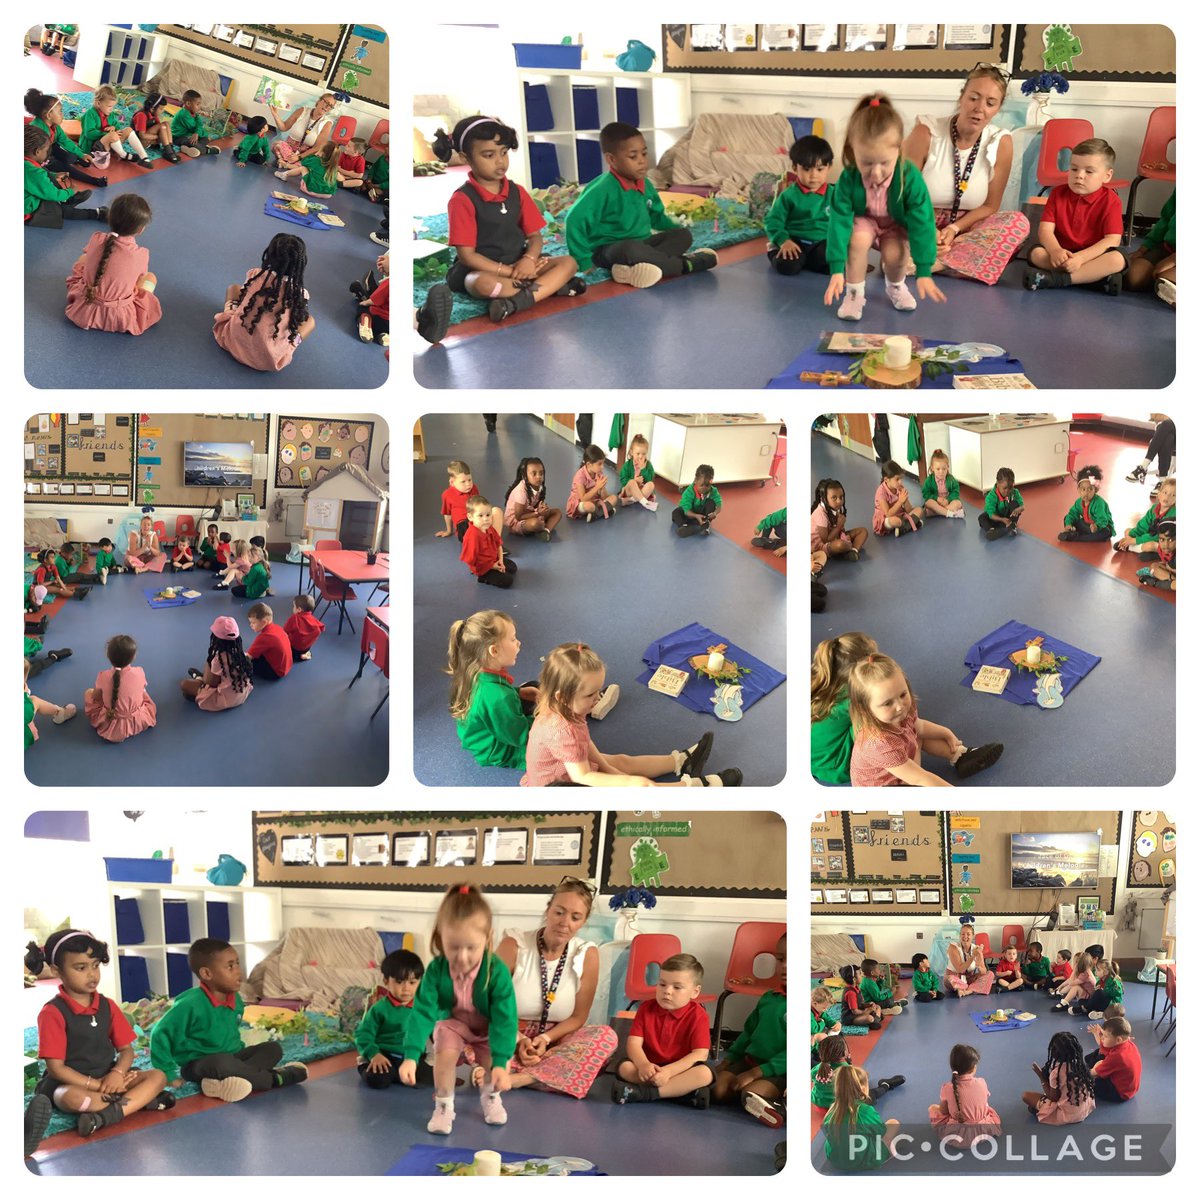 sharing a wonderful collective worship in #nursery Showing how special it is to be a friend like Jesus #article14 @CatholicCardiff